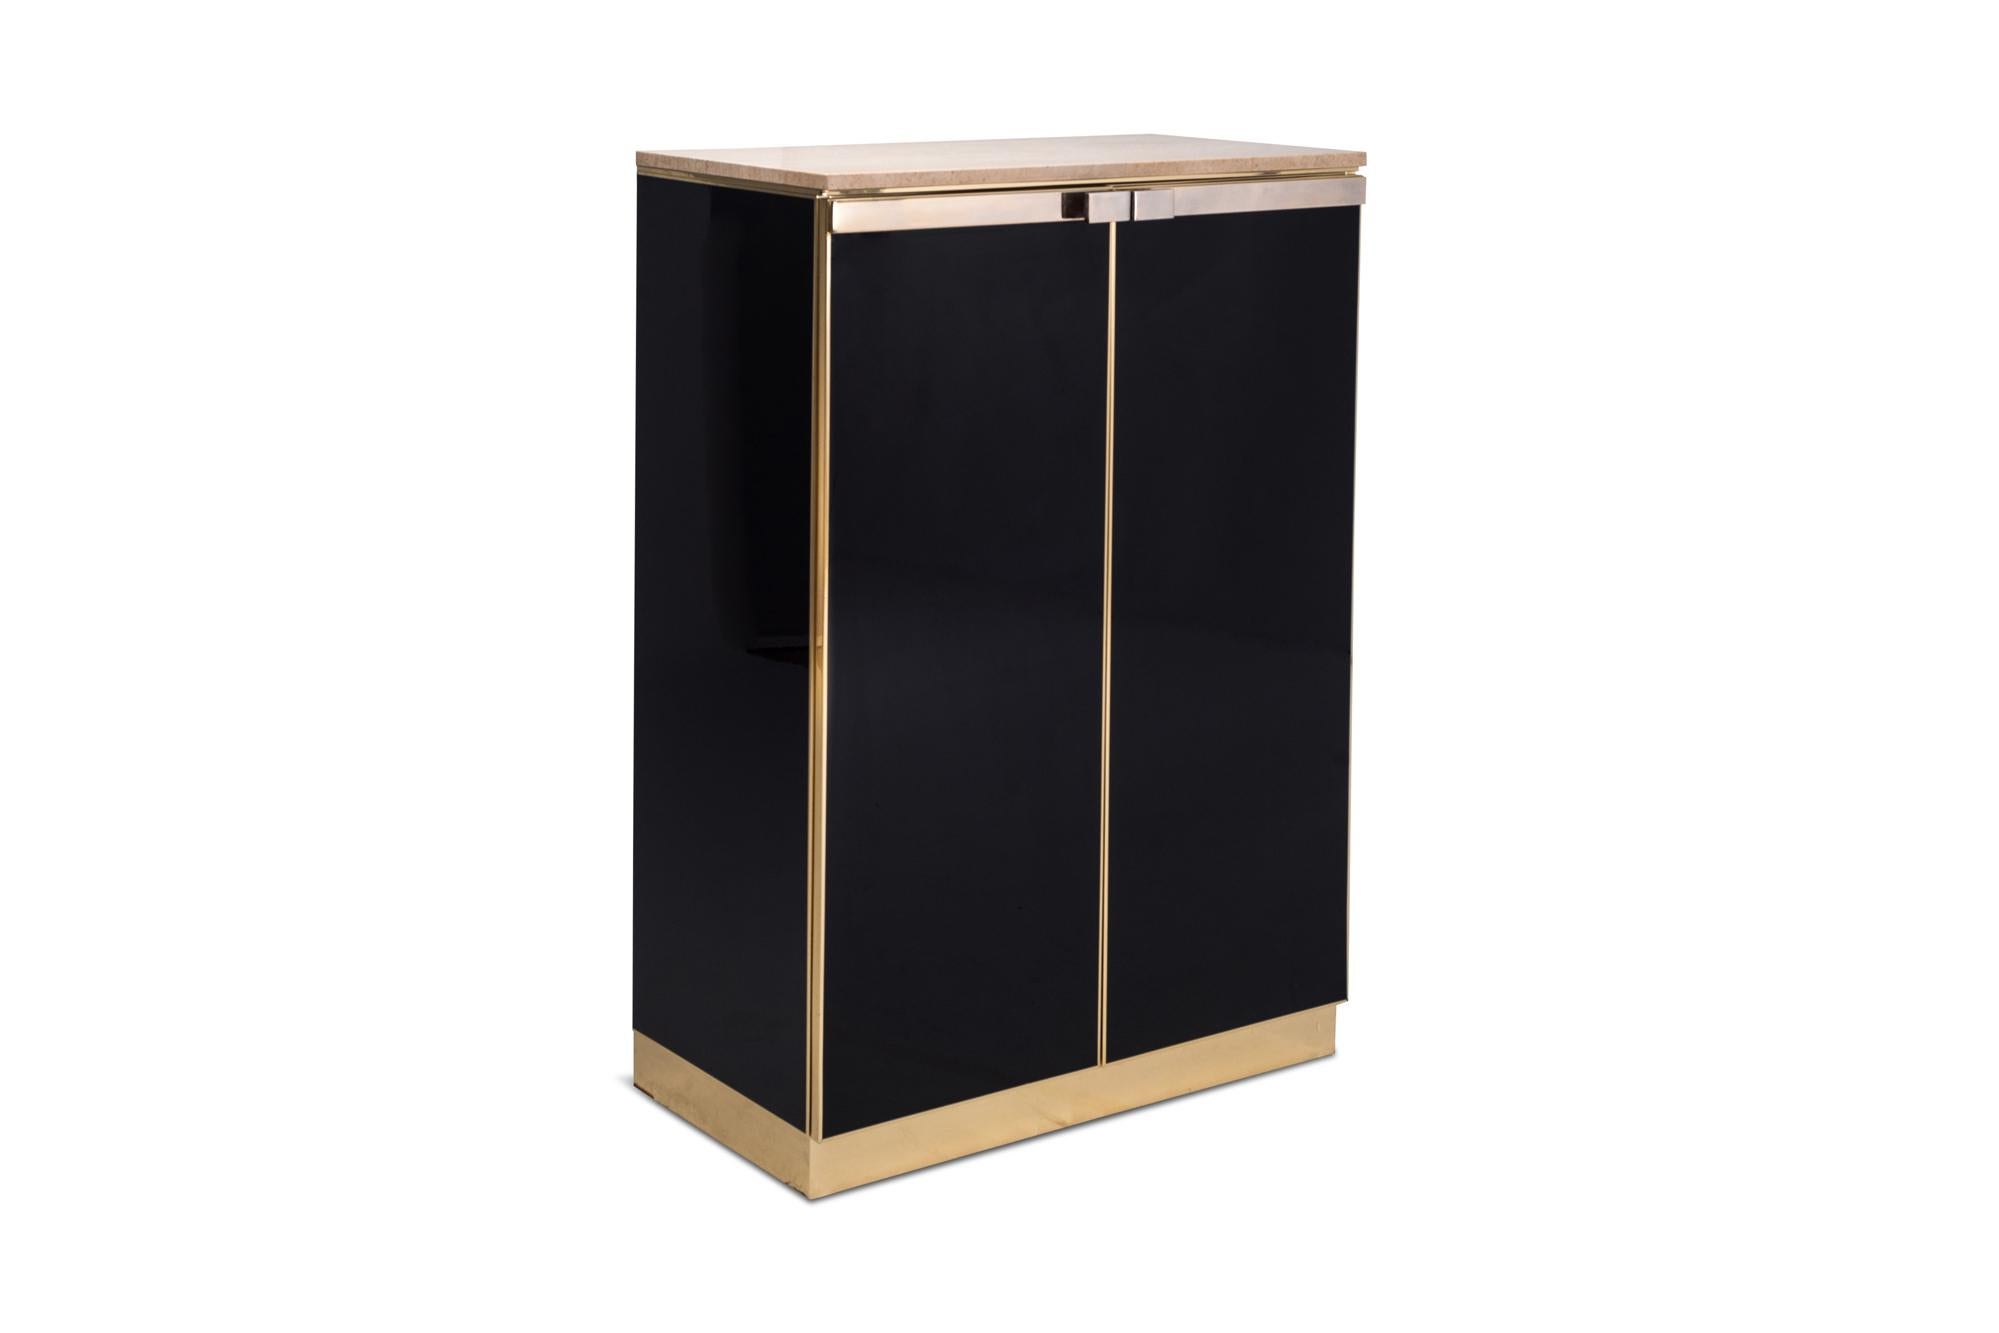 Maison Jansen style high-board produced by Belgo Chrome, Belgium, 1970s. 

This Hollywood Regency style cabinet is equipped with black lacquered high gloss doors and side panels, and fitted with a travertine top. The piece is finished with brass